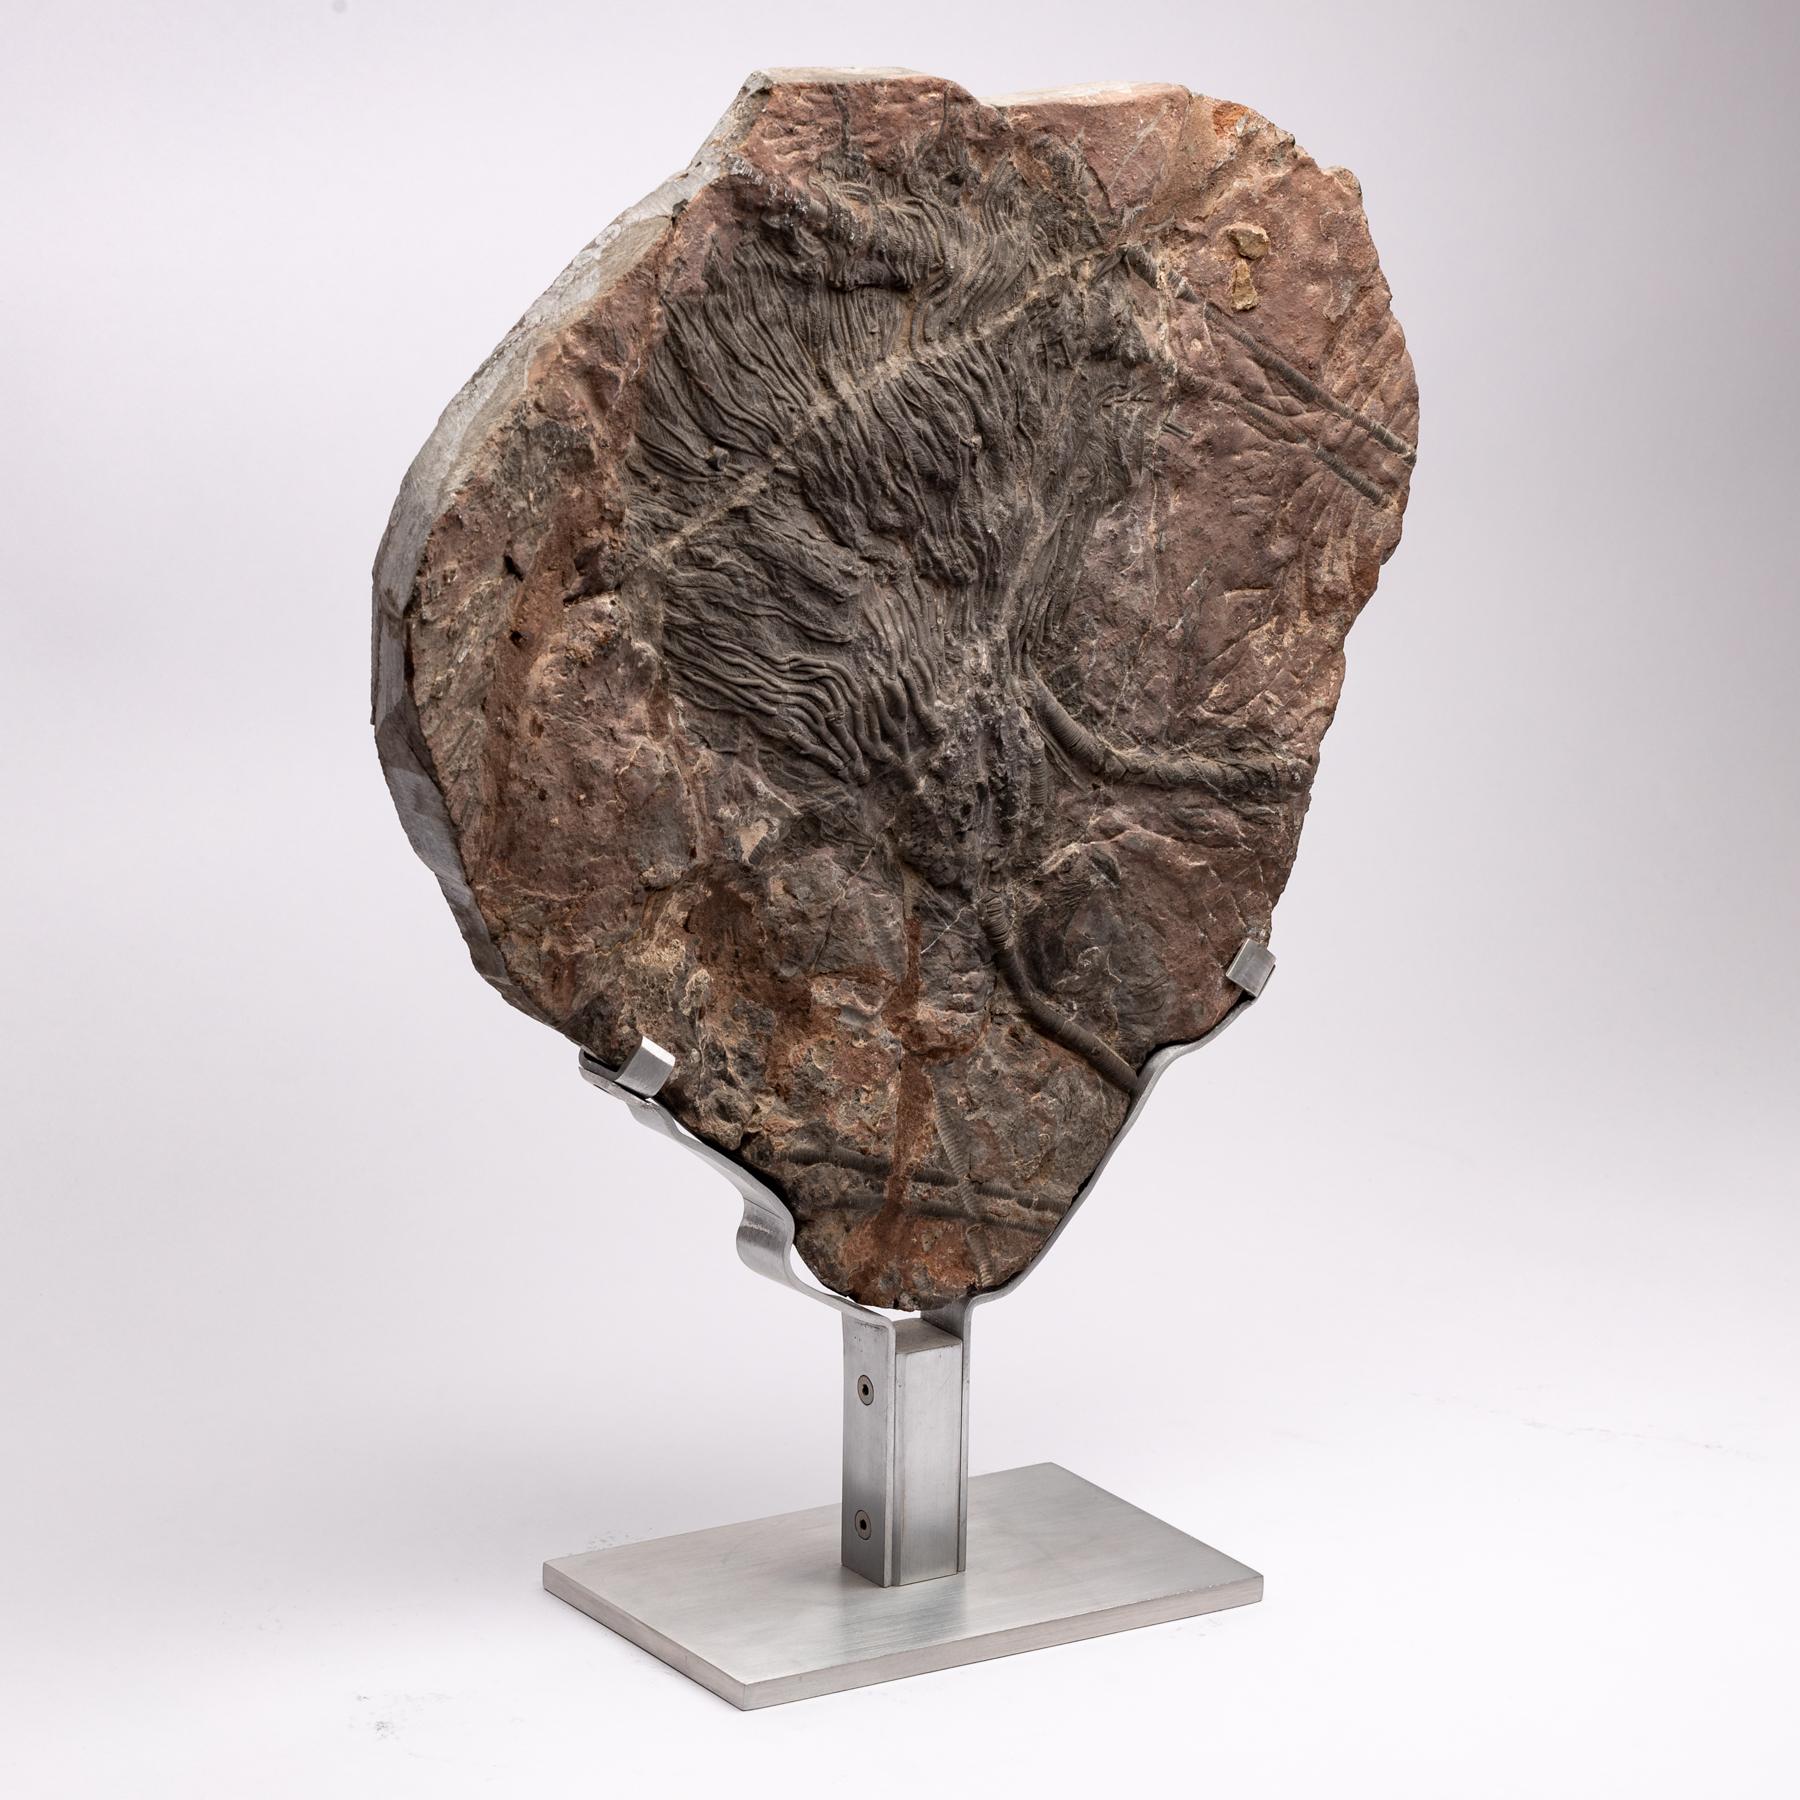 Mexican Moroccan Fossil Crinoid Mounted on Custom Aluminum Stand, Silurian Period